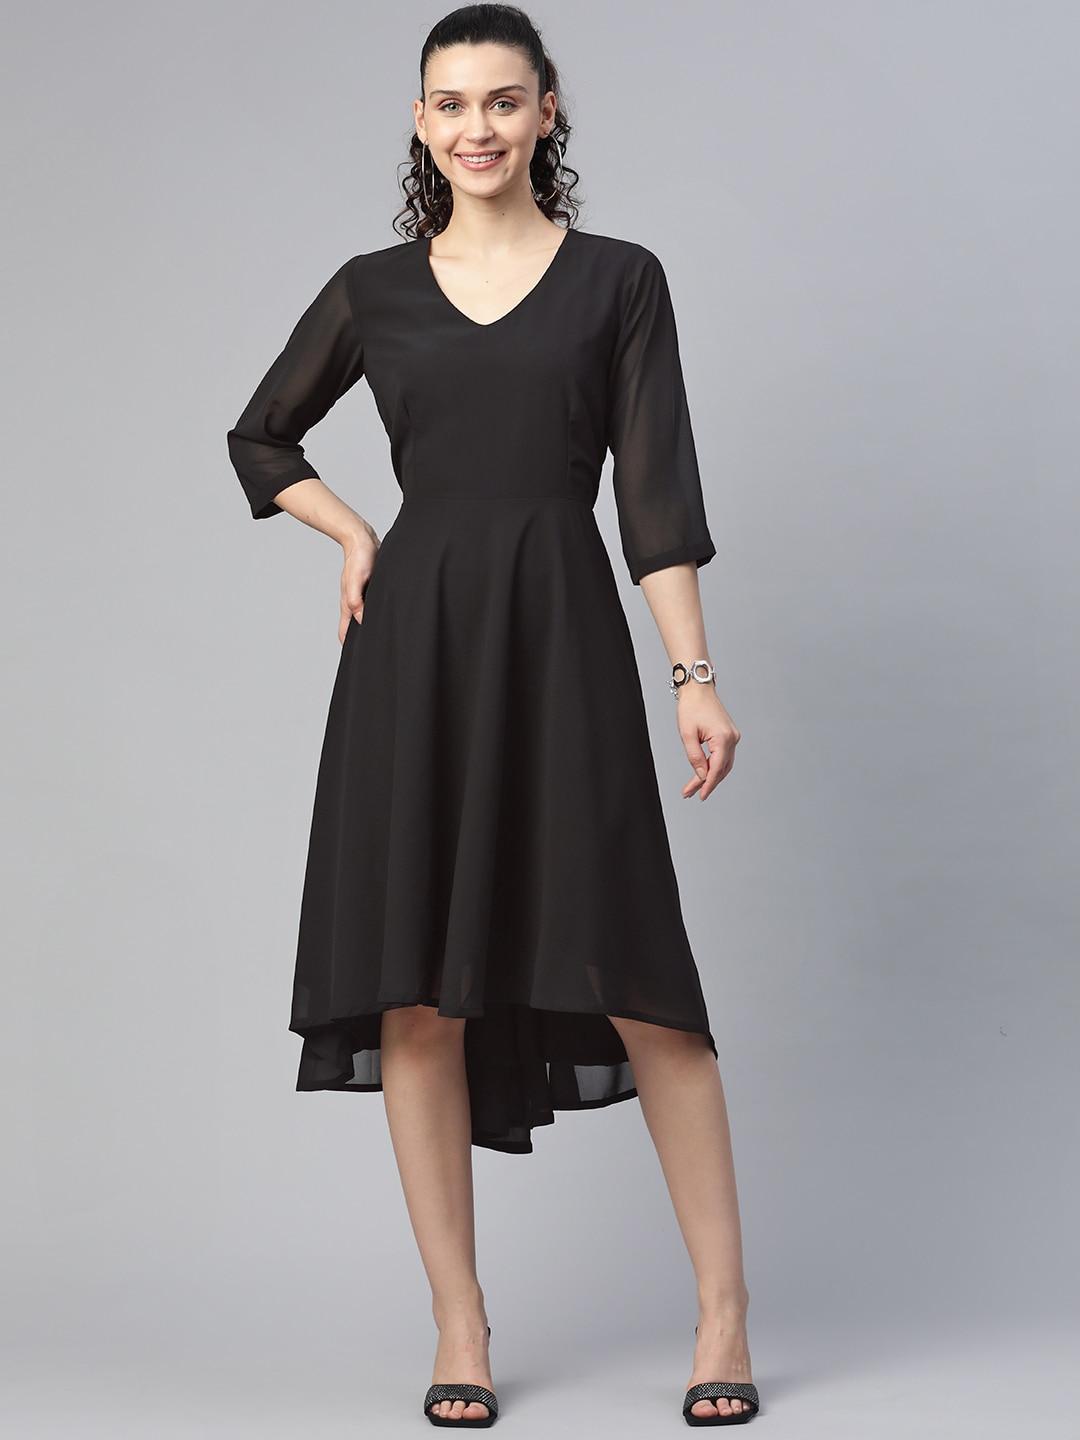 PowerSutra Black Solid Fit & Flare Georgette Dress